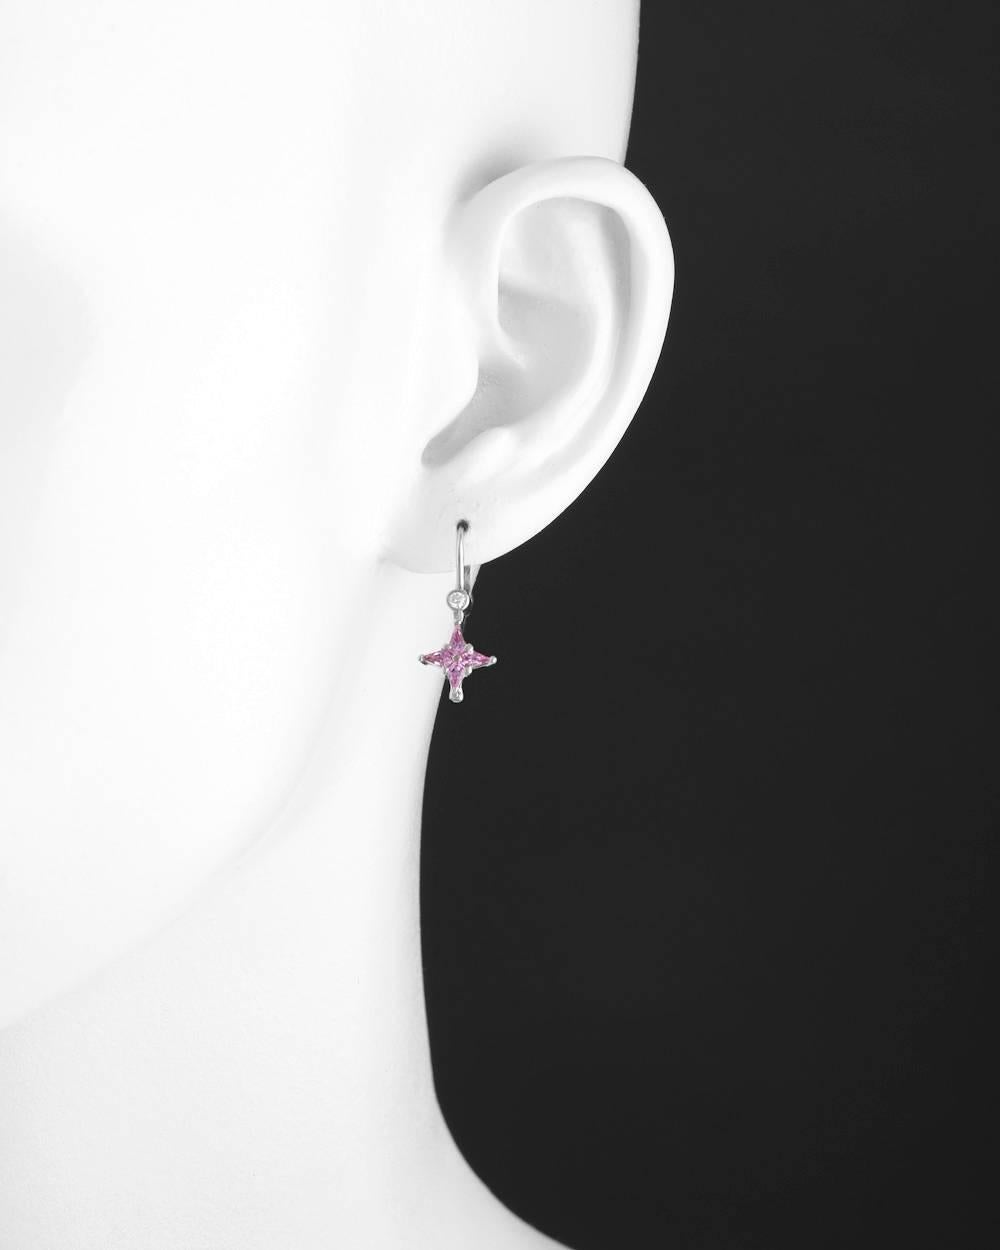 Drop earrings, each designed as a four-pointed star motif composed of pink sapphires to the bezel-set diamond surmount, in 18k white gold, with French wires and leverbacks for pierced ears. Eight kite-shaped pink sapphires weighing approximately